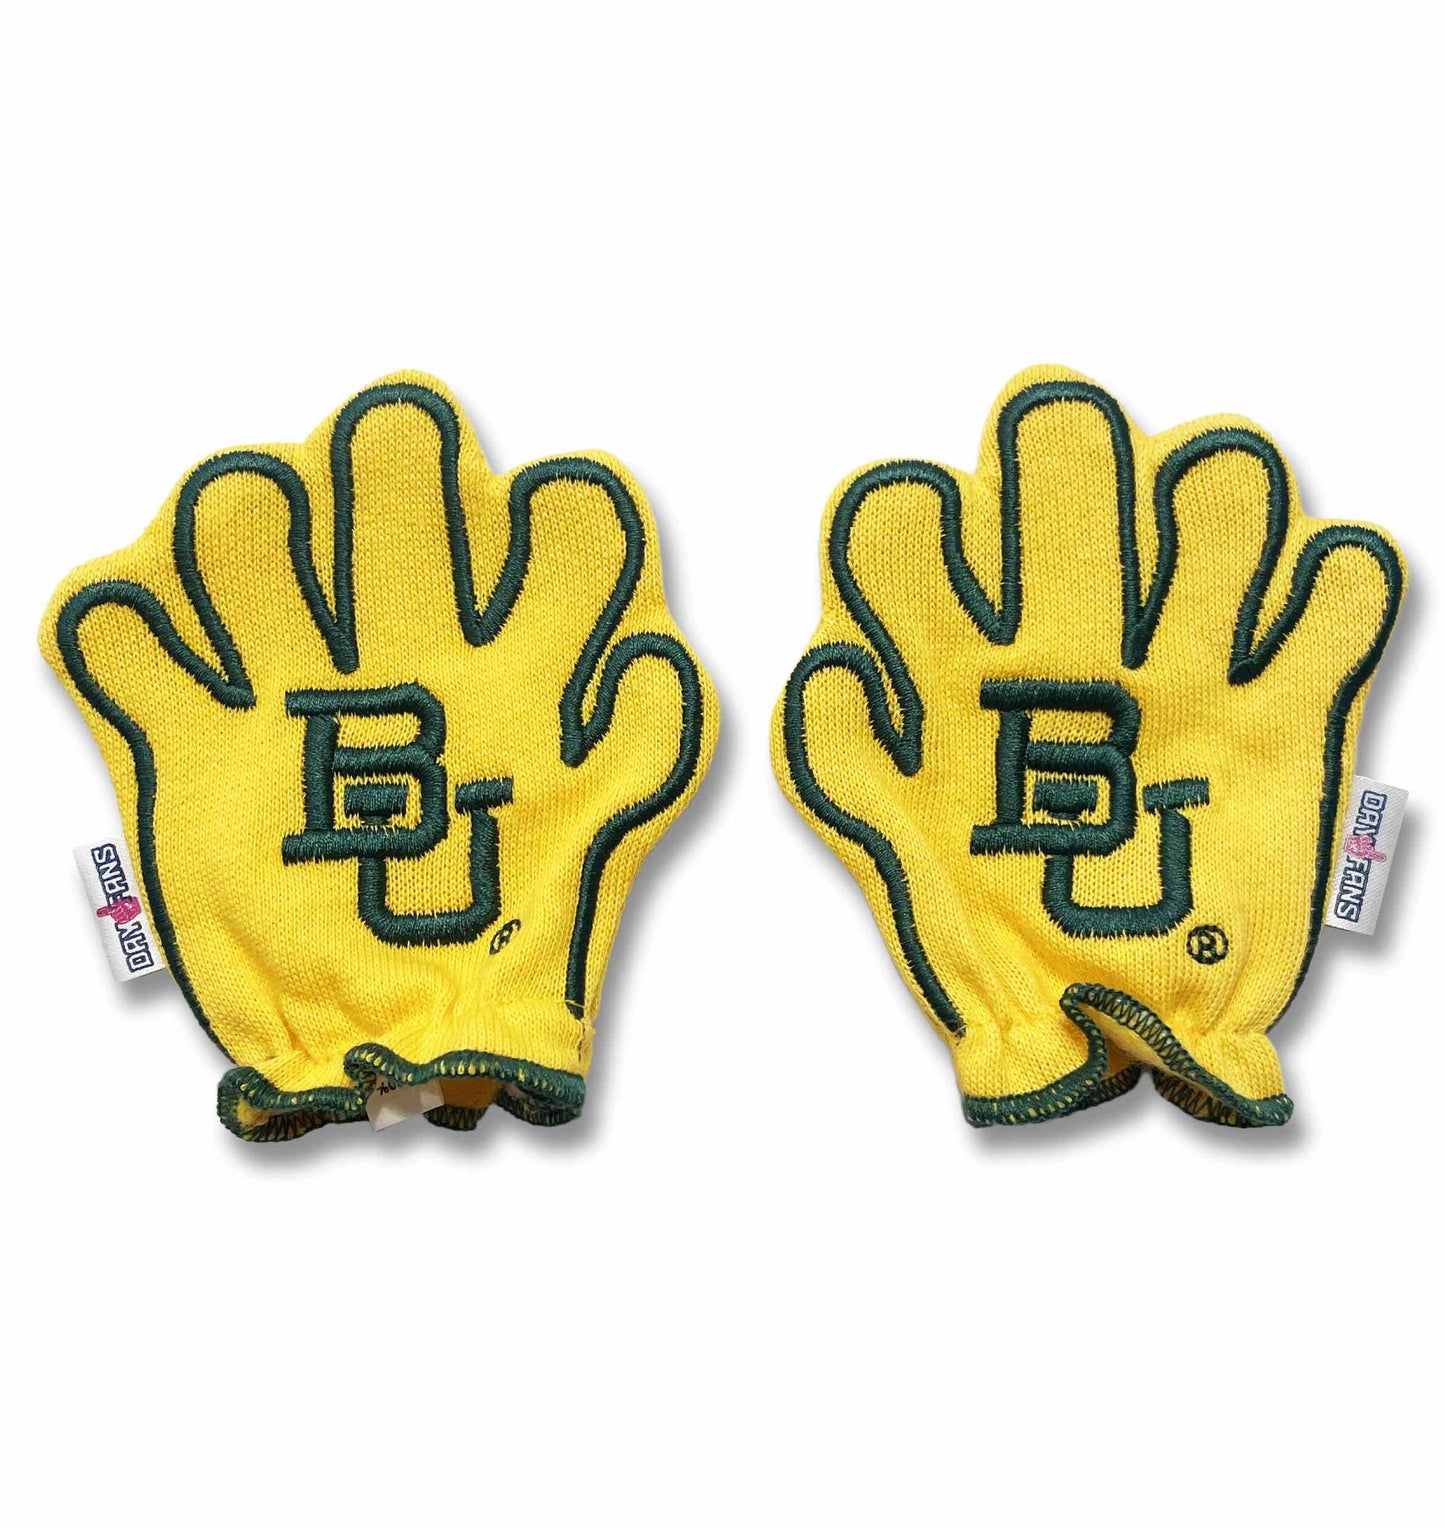 Baylor Sic Em FanMitts Baby Mittens University Yellow Back Pair